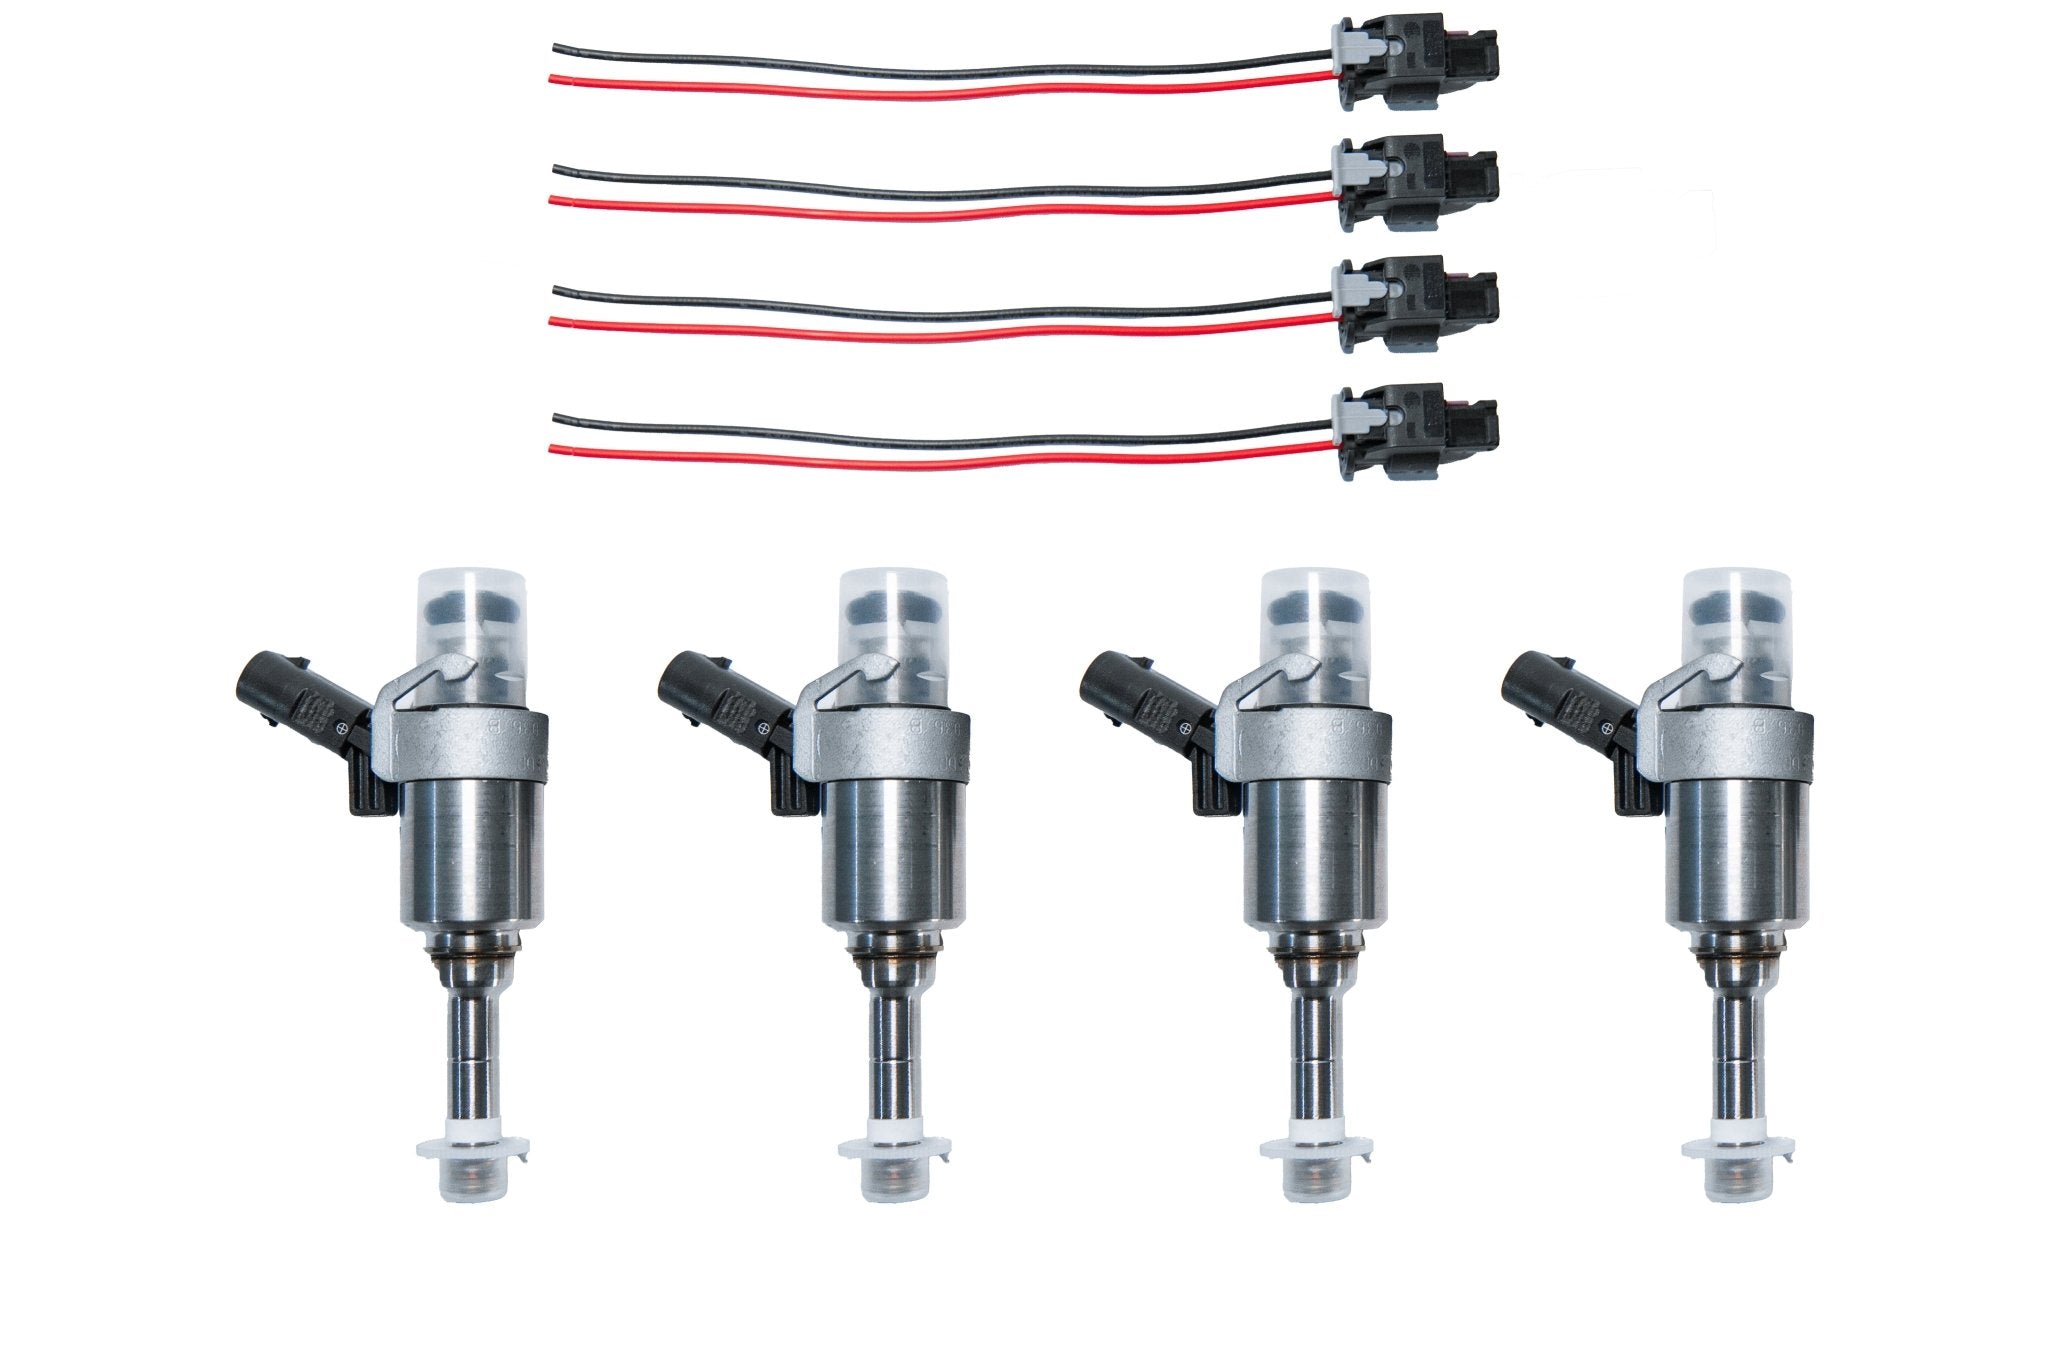 1.4 TSI EA111 Injectors for up to 420 hp - RTMG Performance